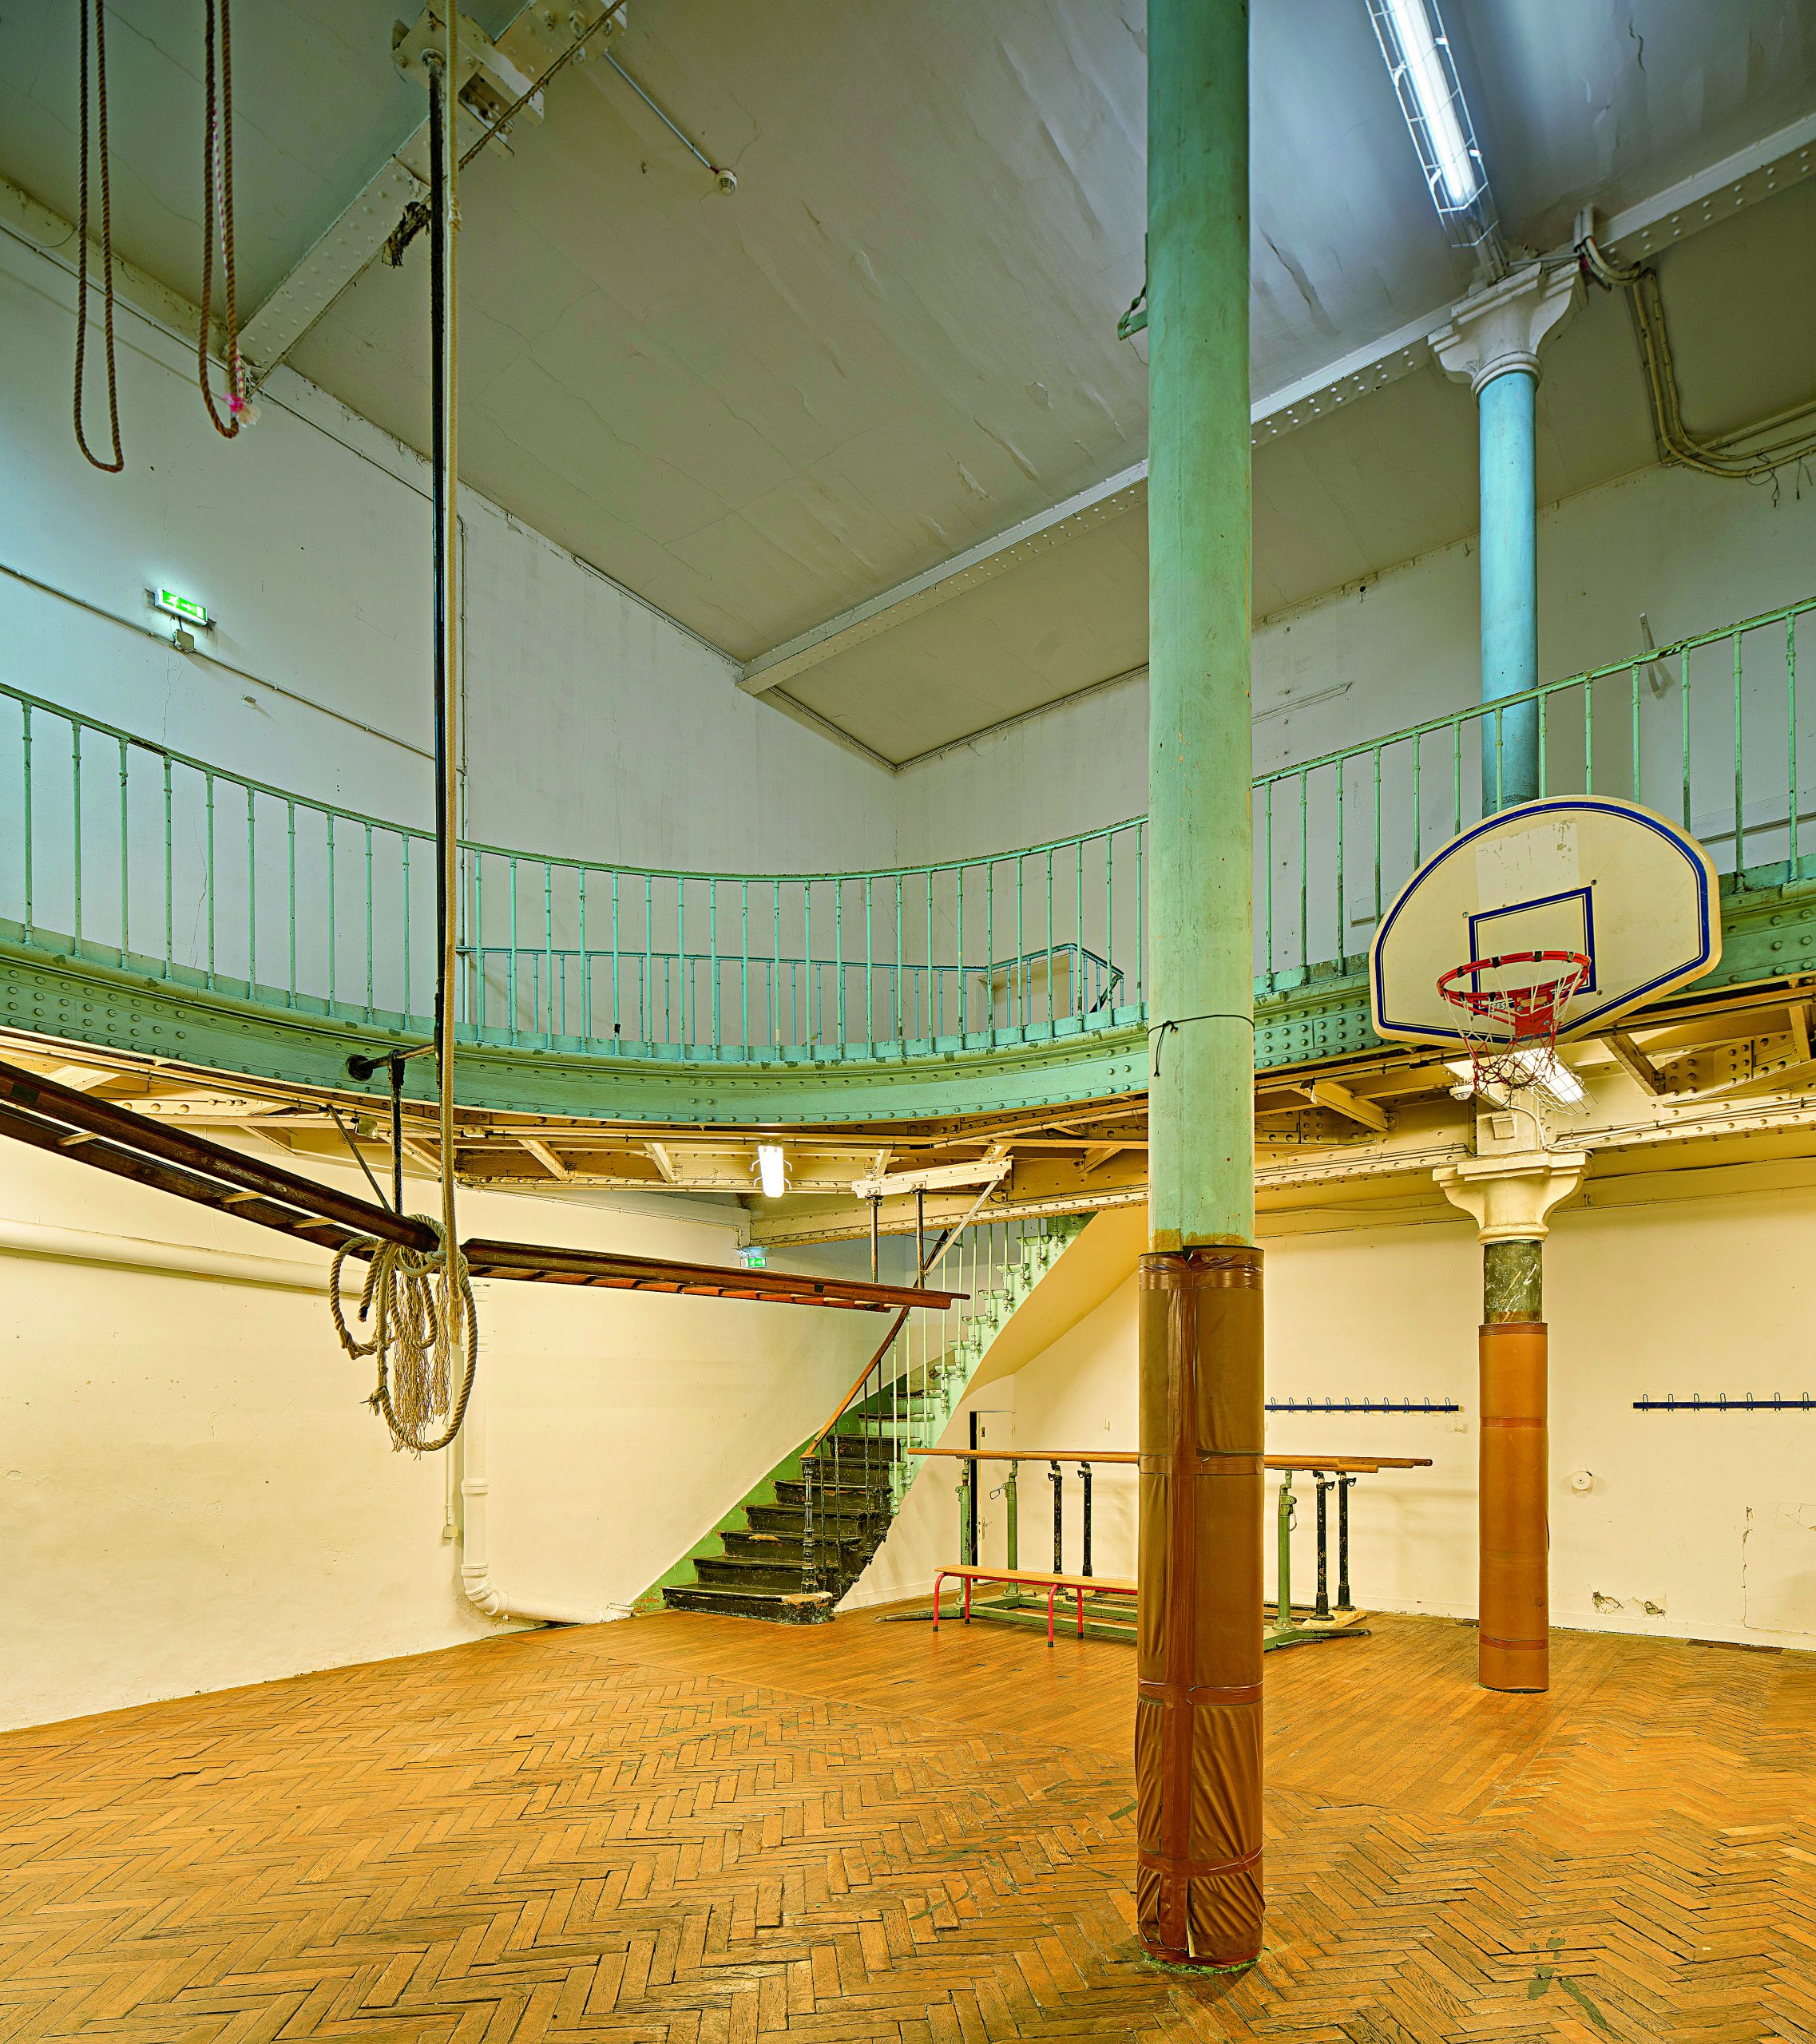 Ahead of the 2024 Olympics in Paris, the World’s Oldest Surviving Basketball Court is Being Fully Restored